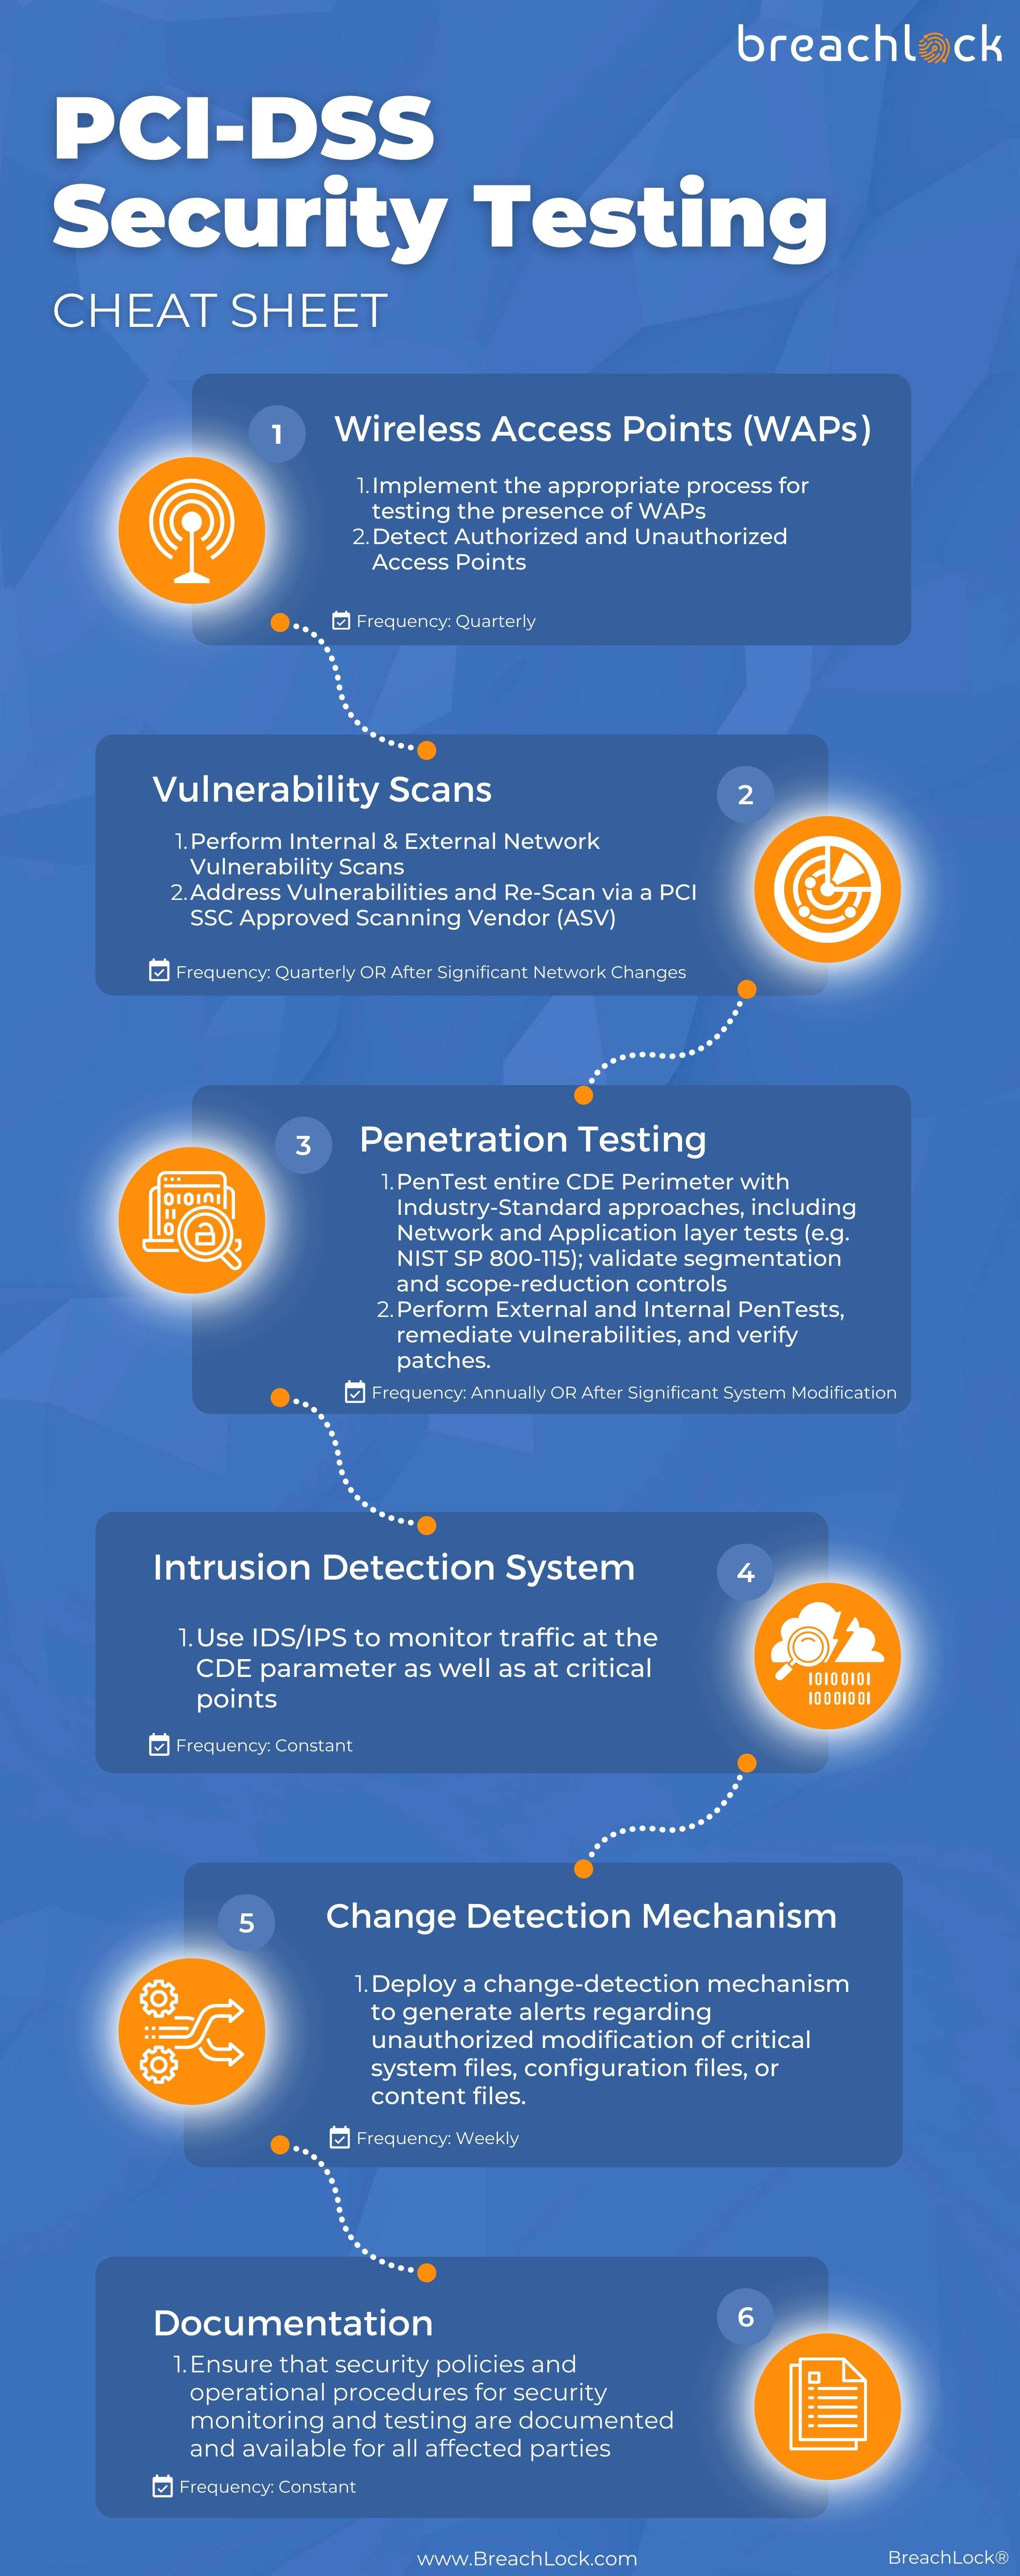 BreachLock PCI DSS Compliance Infographic 